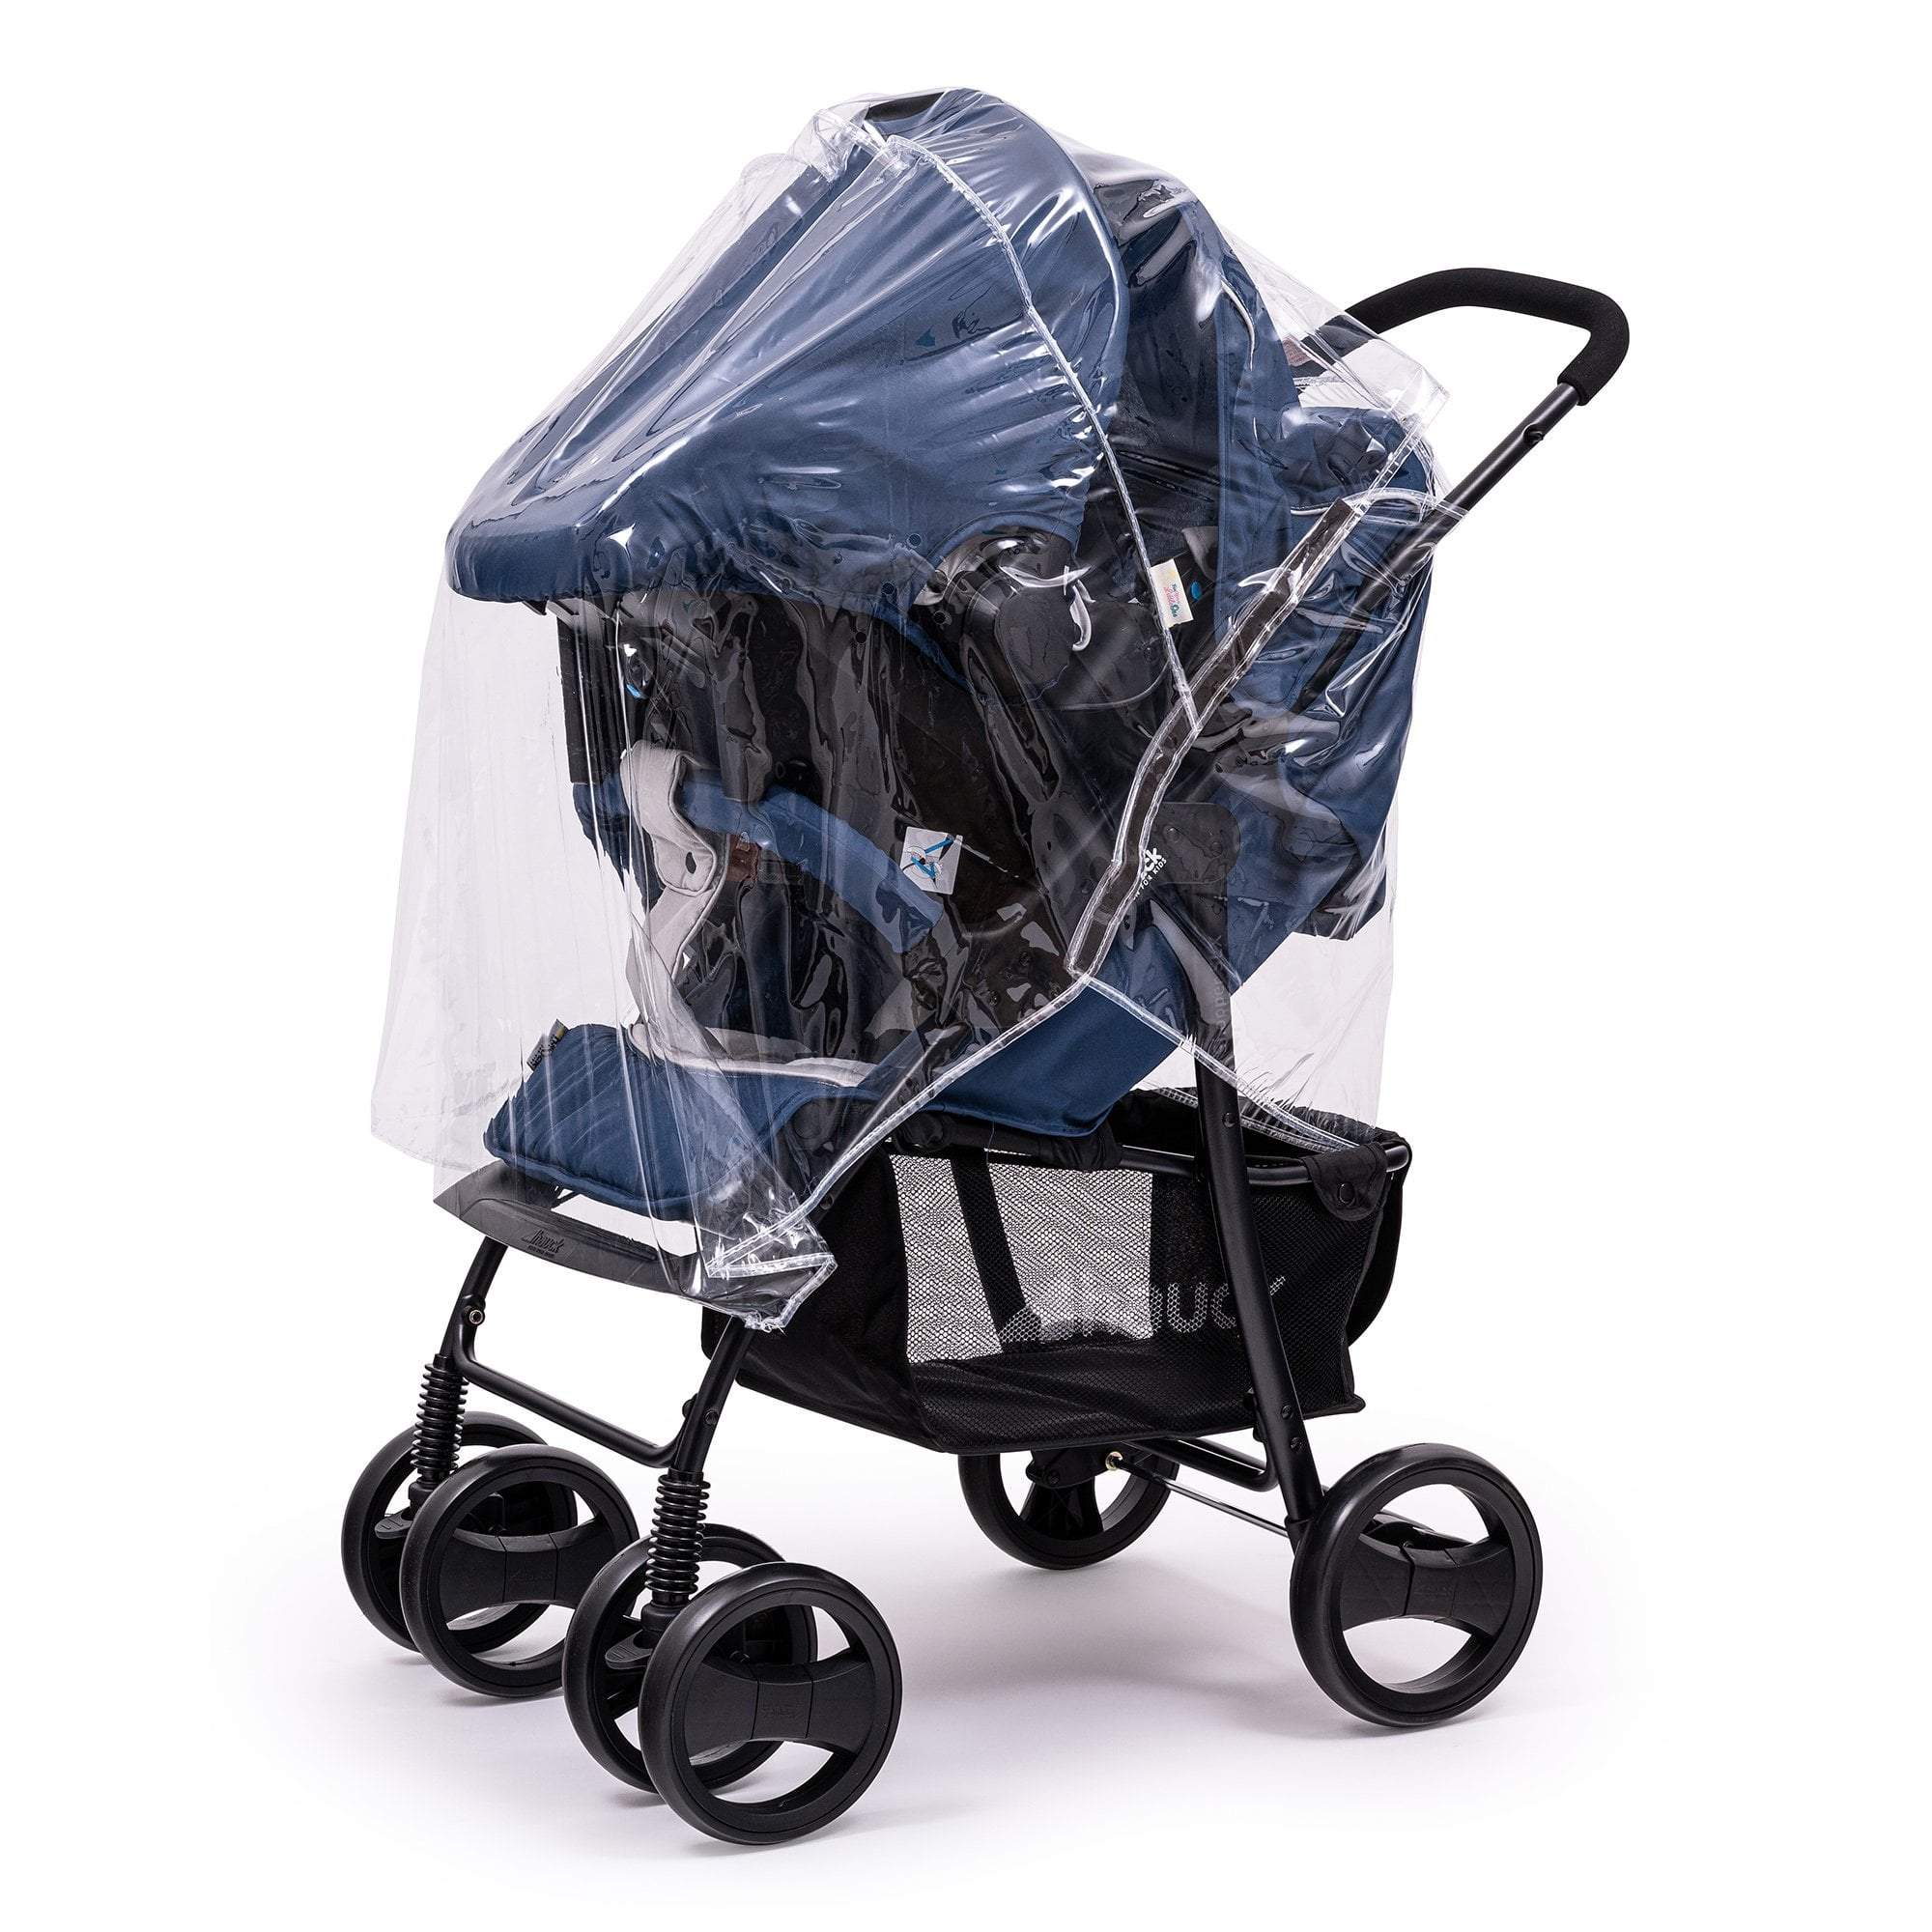 Travel System Raincover Compatible with DoBuggy - Fits All Models - For Your Little One